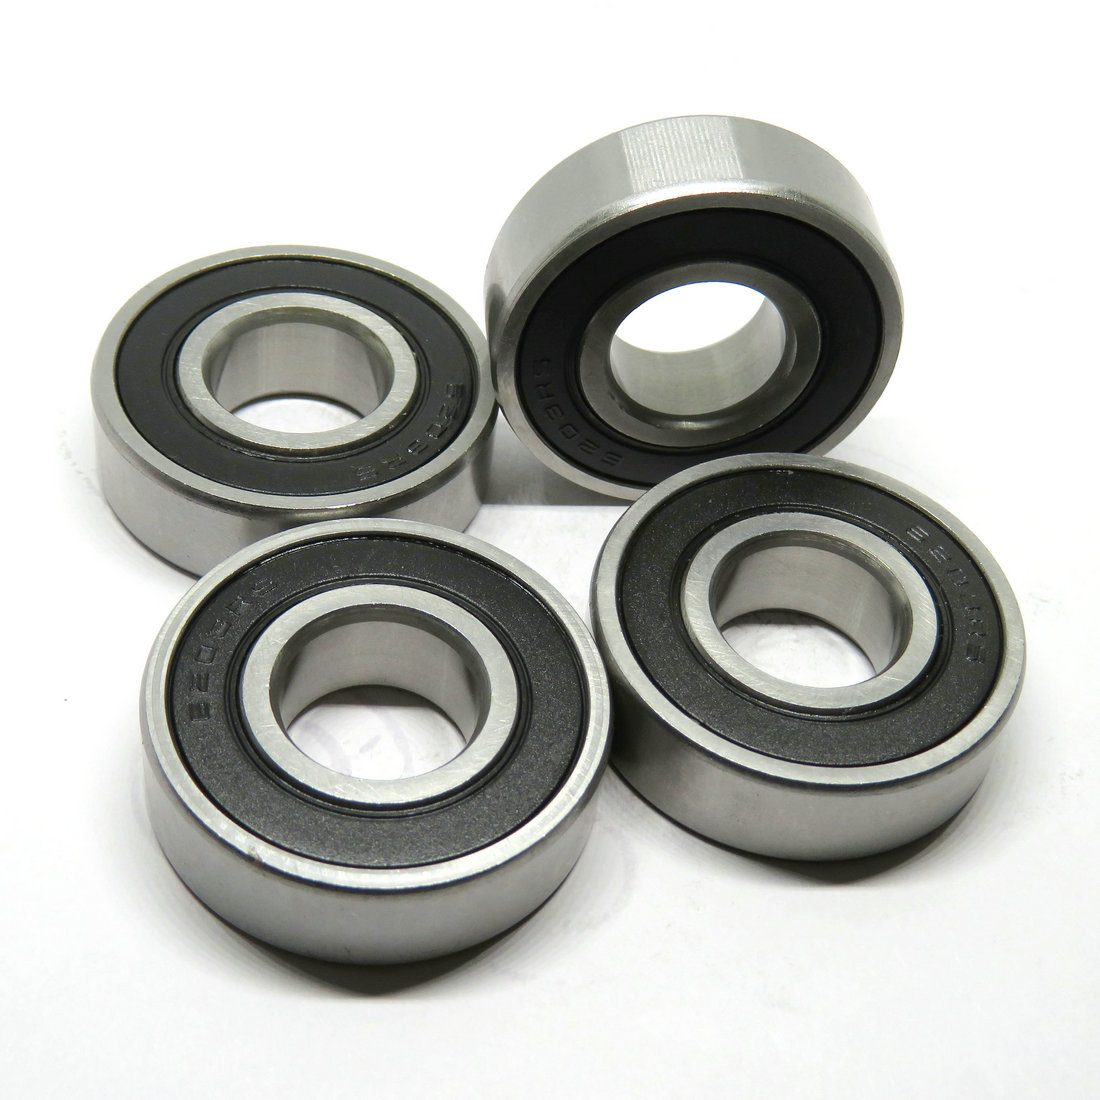 6203RS Deep Groove Ball Bearing Double Rubber Sealed Bearing 17x40x12mm Stable Performance 6203 2RS.jpg